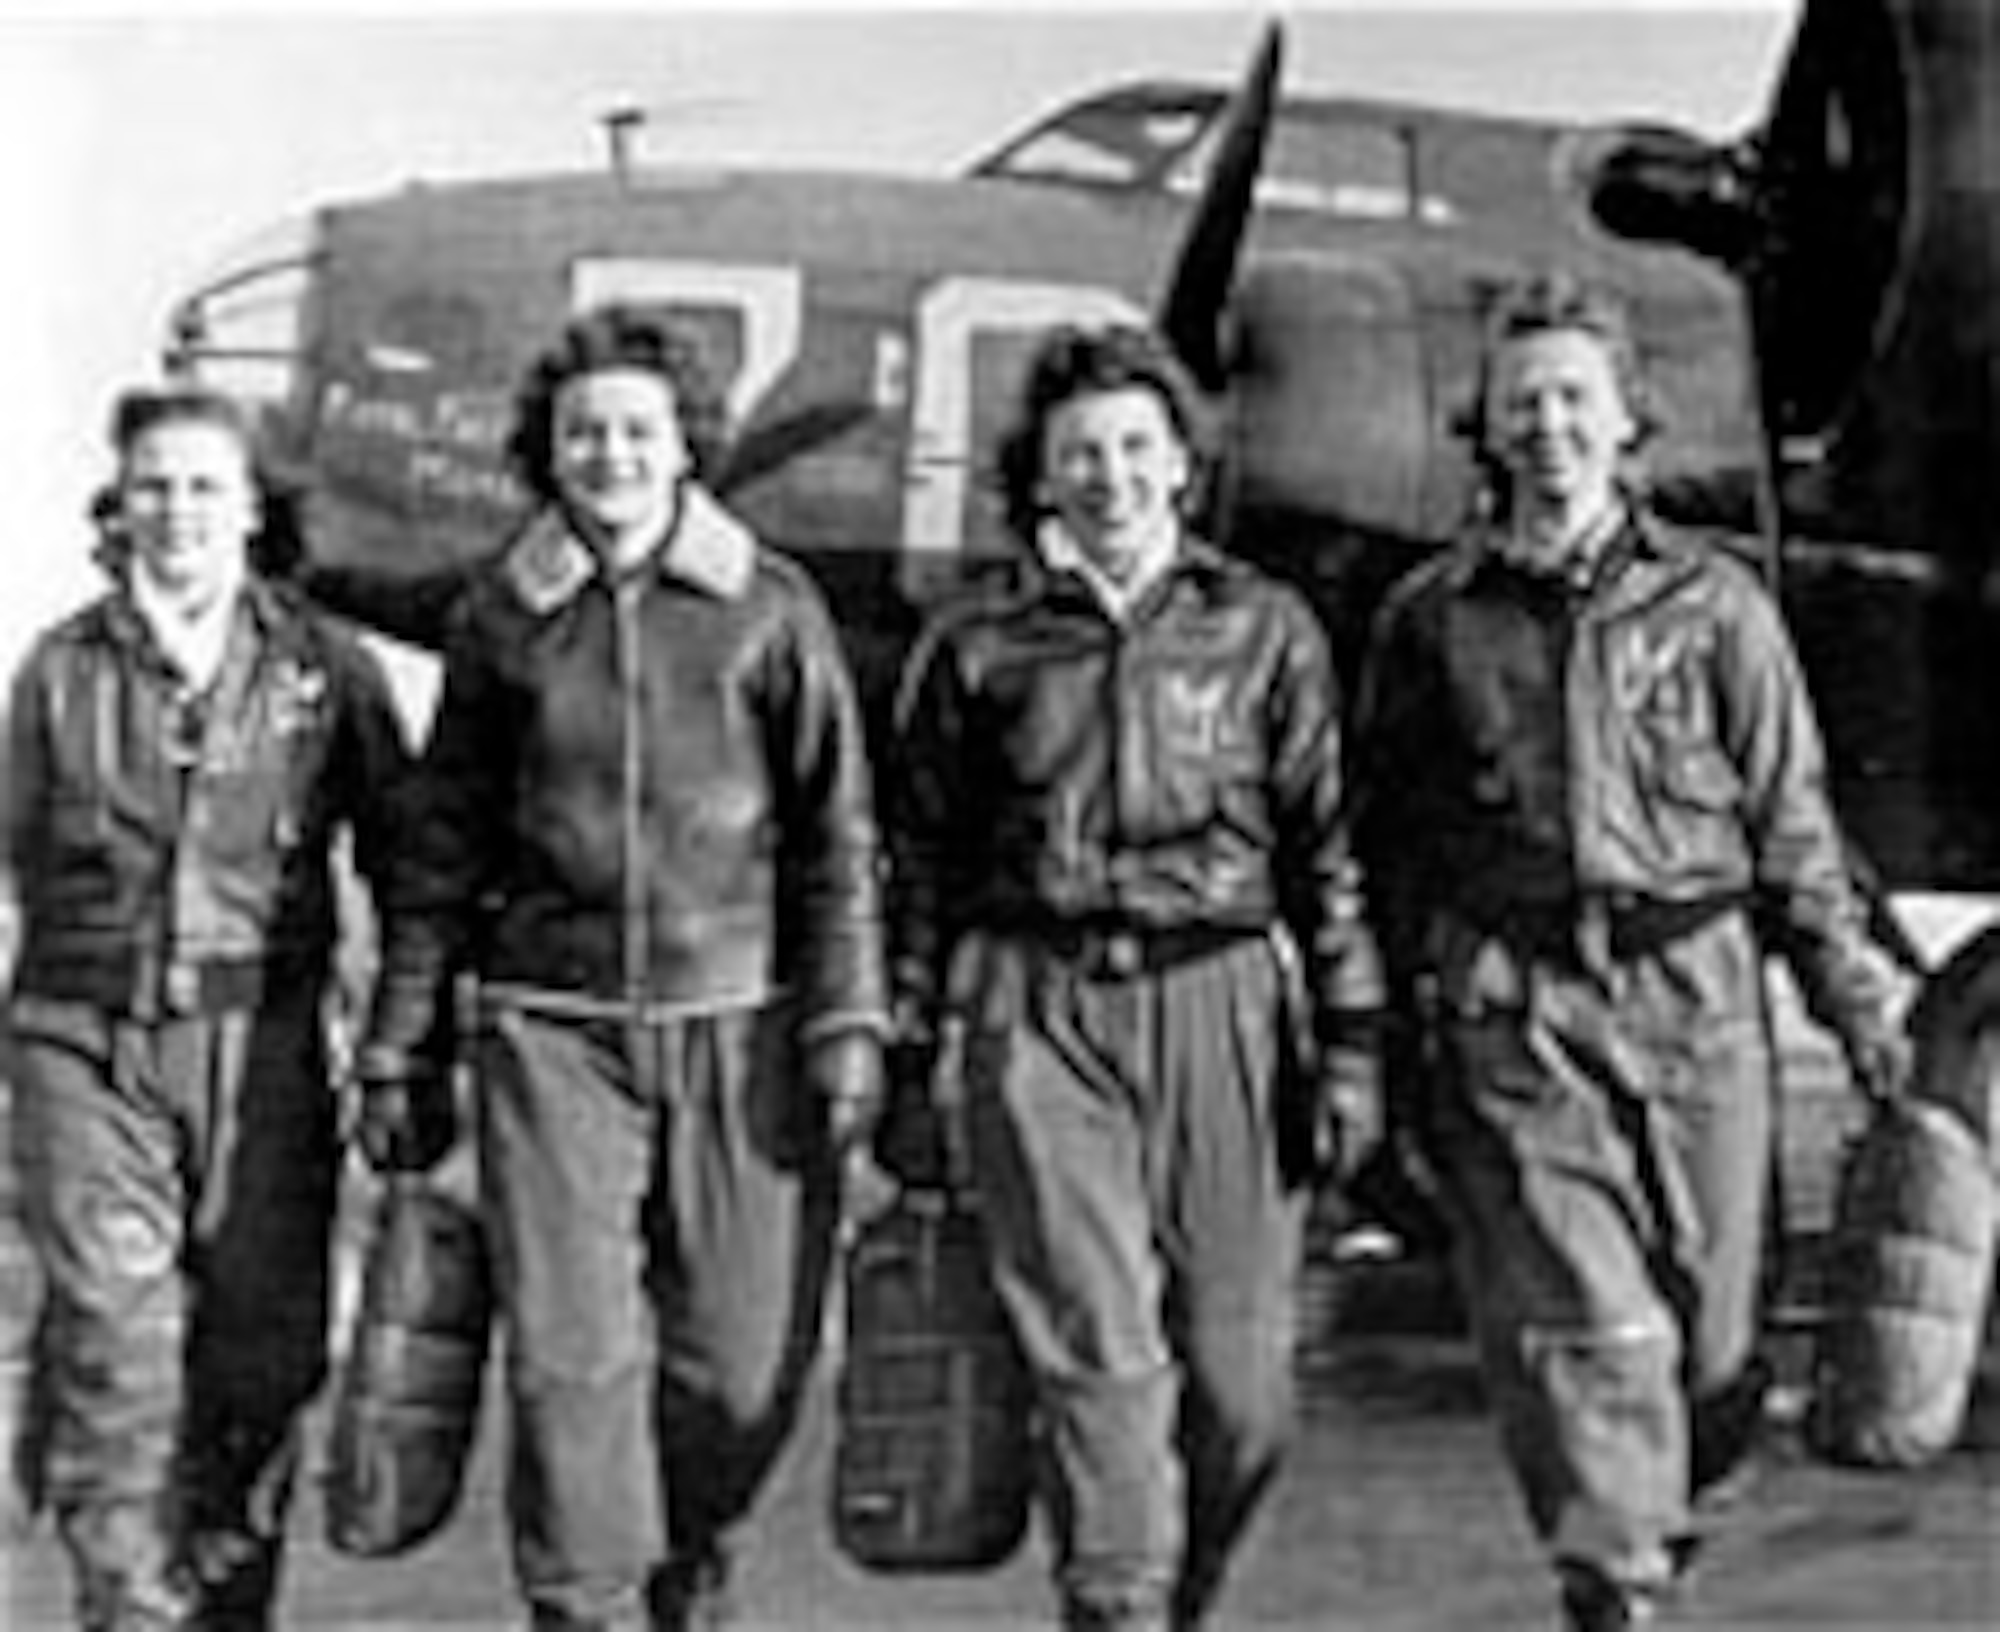 WASP flight crew of a Boeing B-17 Flying Fortress. (U.S. Air Force photo)